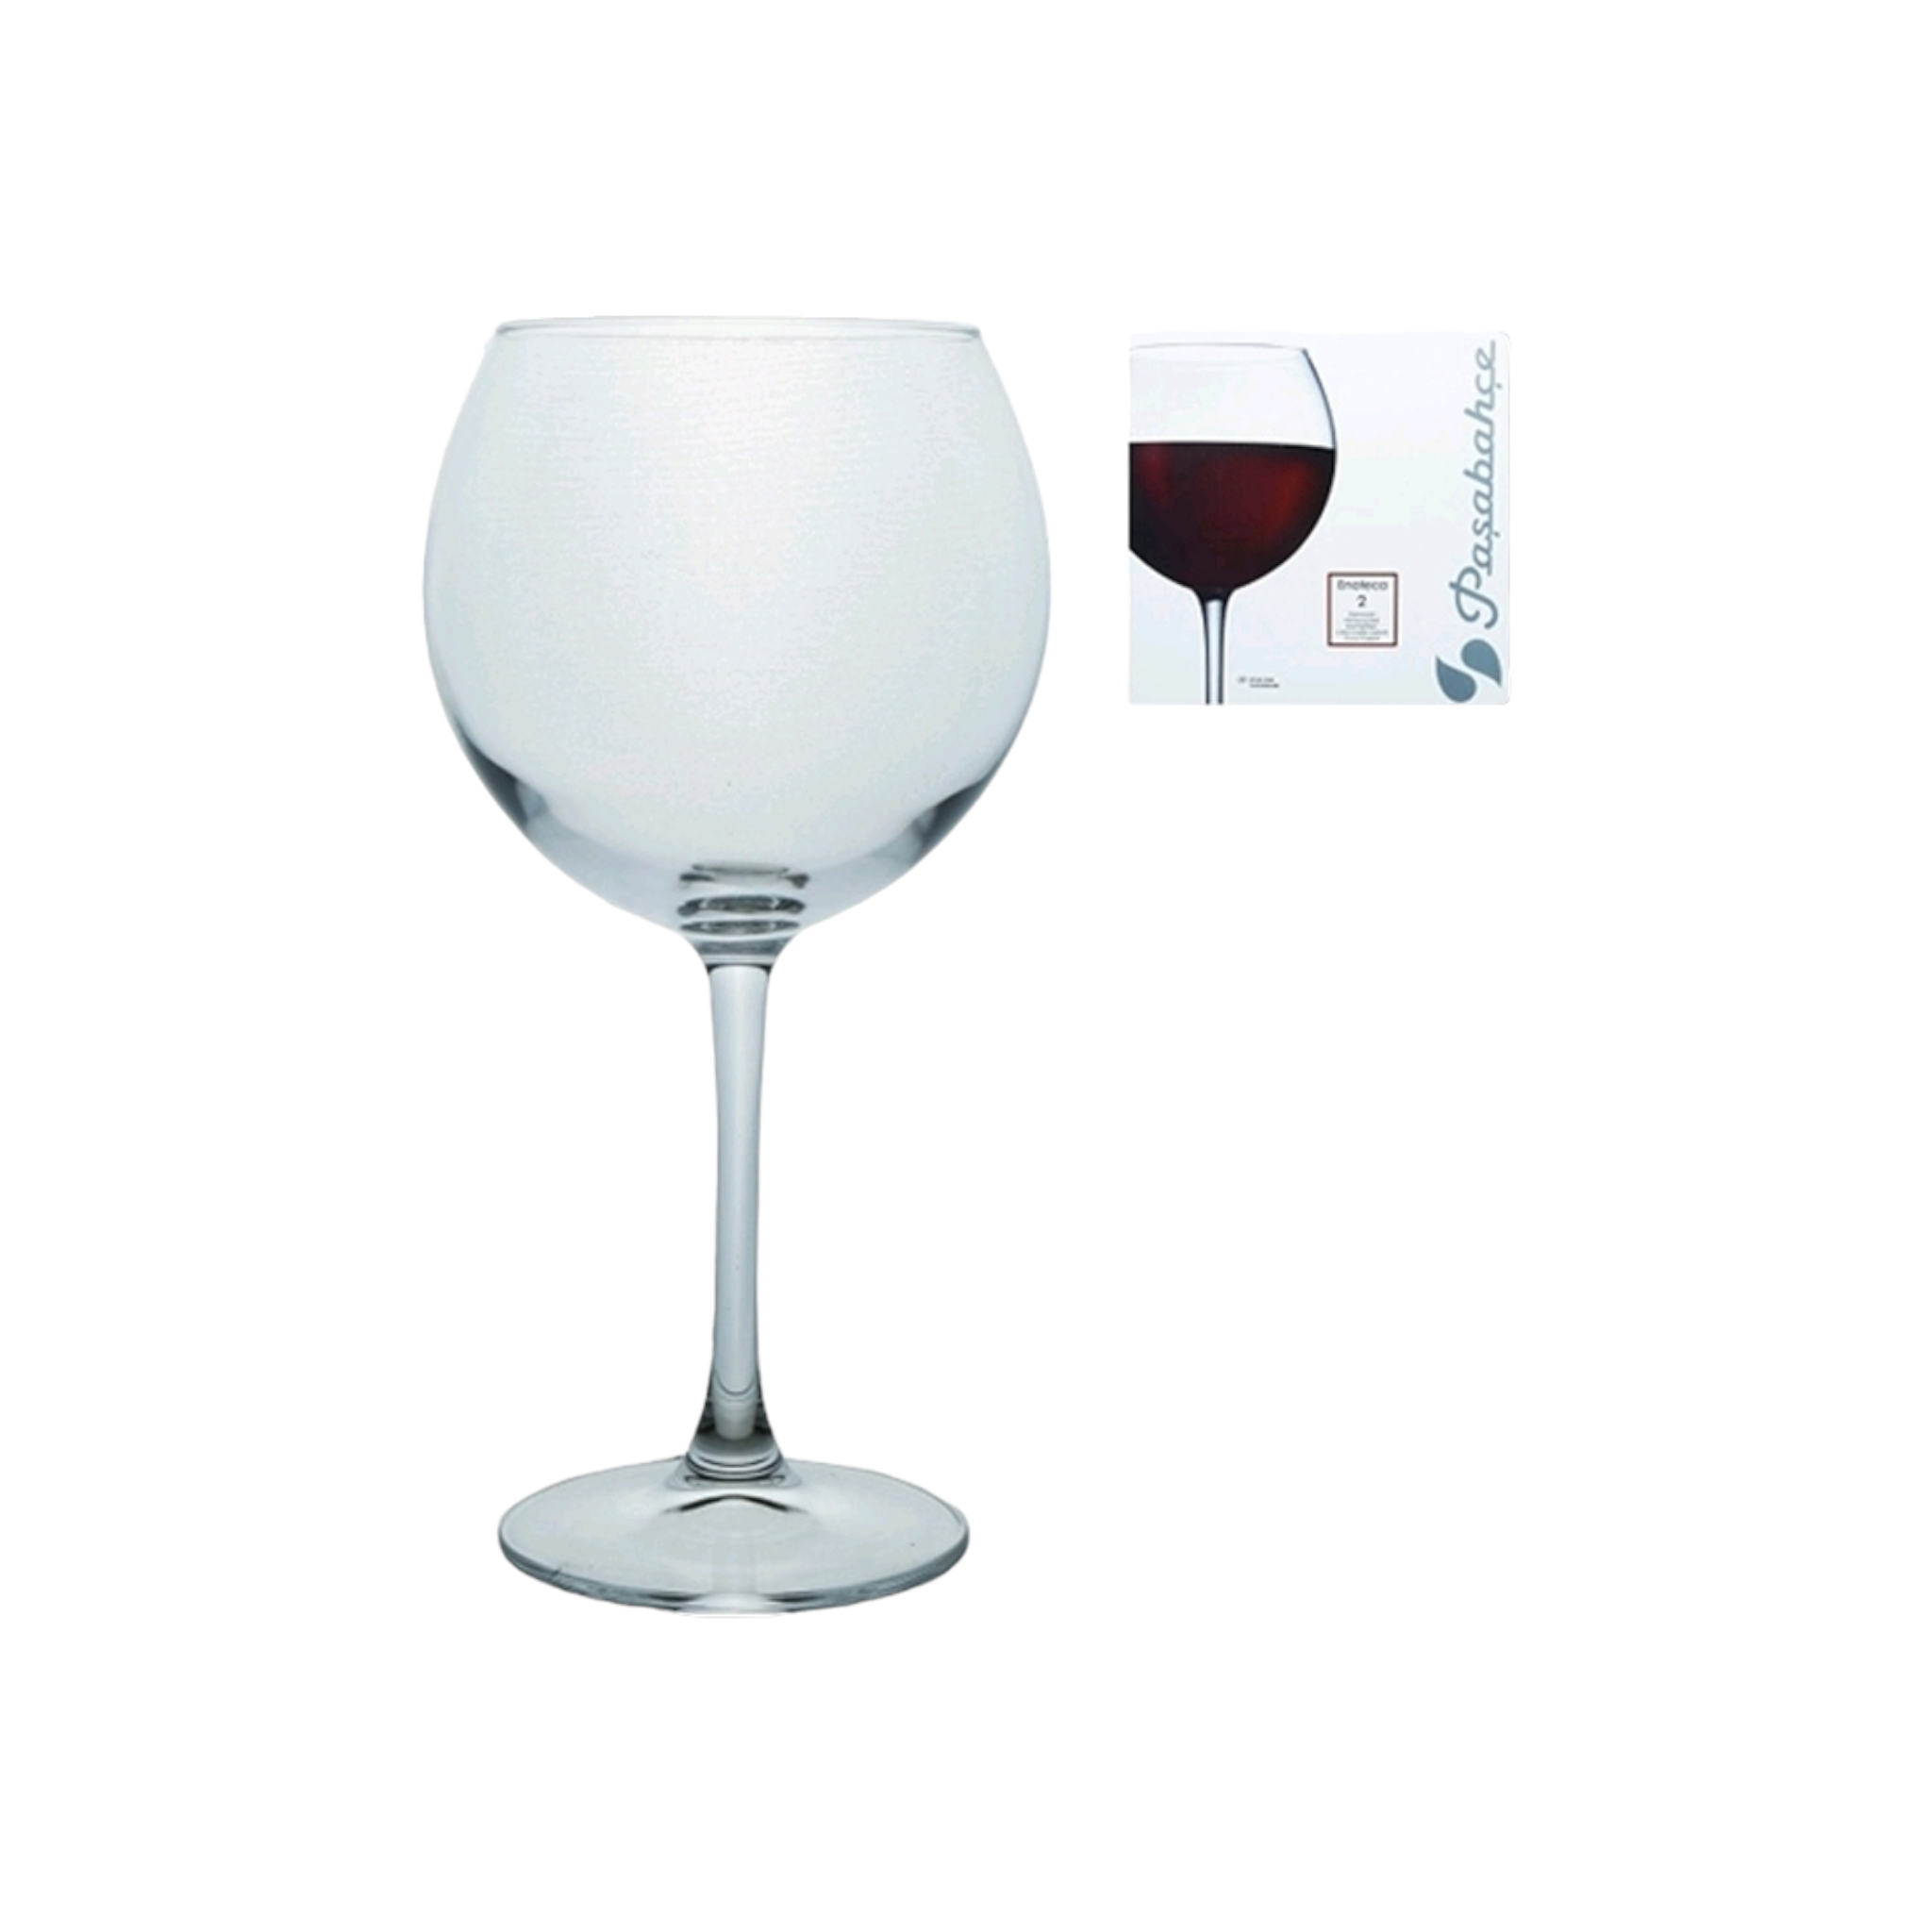 Pasabahce Enoteca Glass Tumbler 650ml Red Wine 2pack 24039